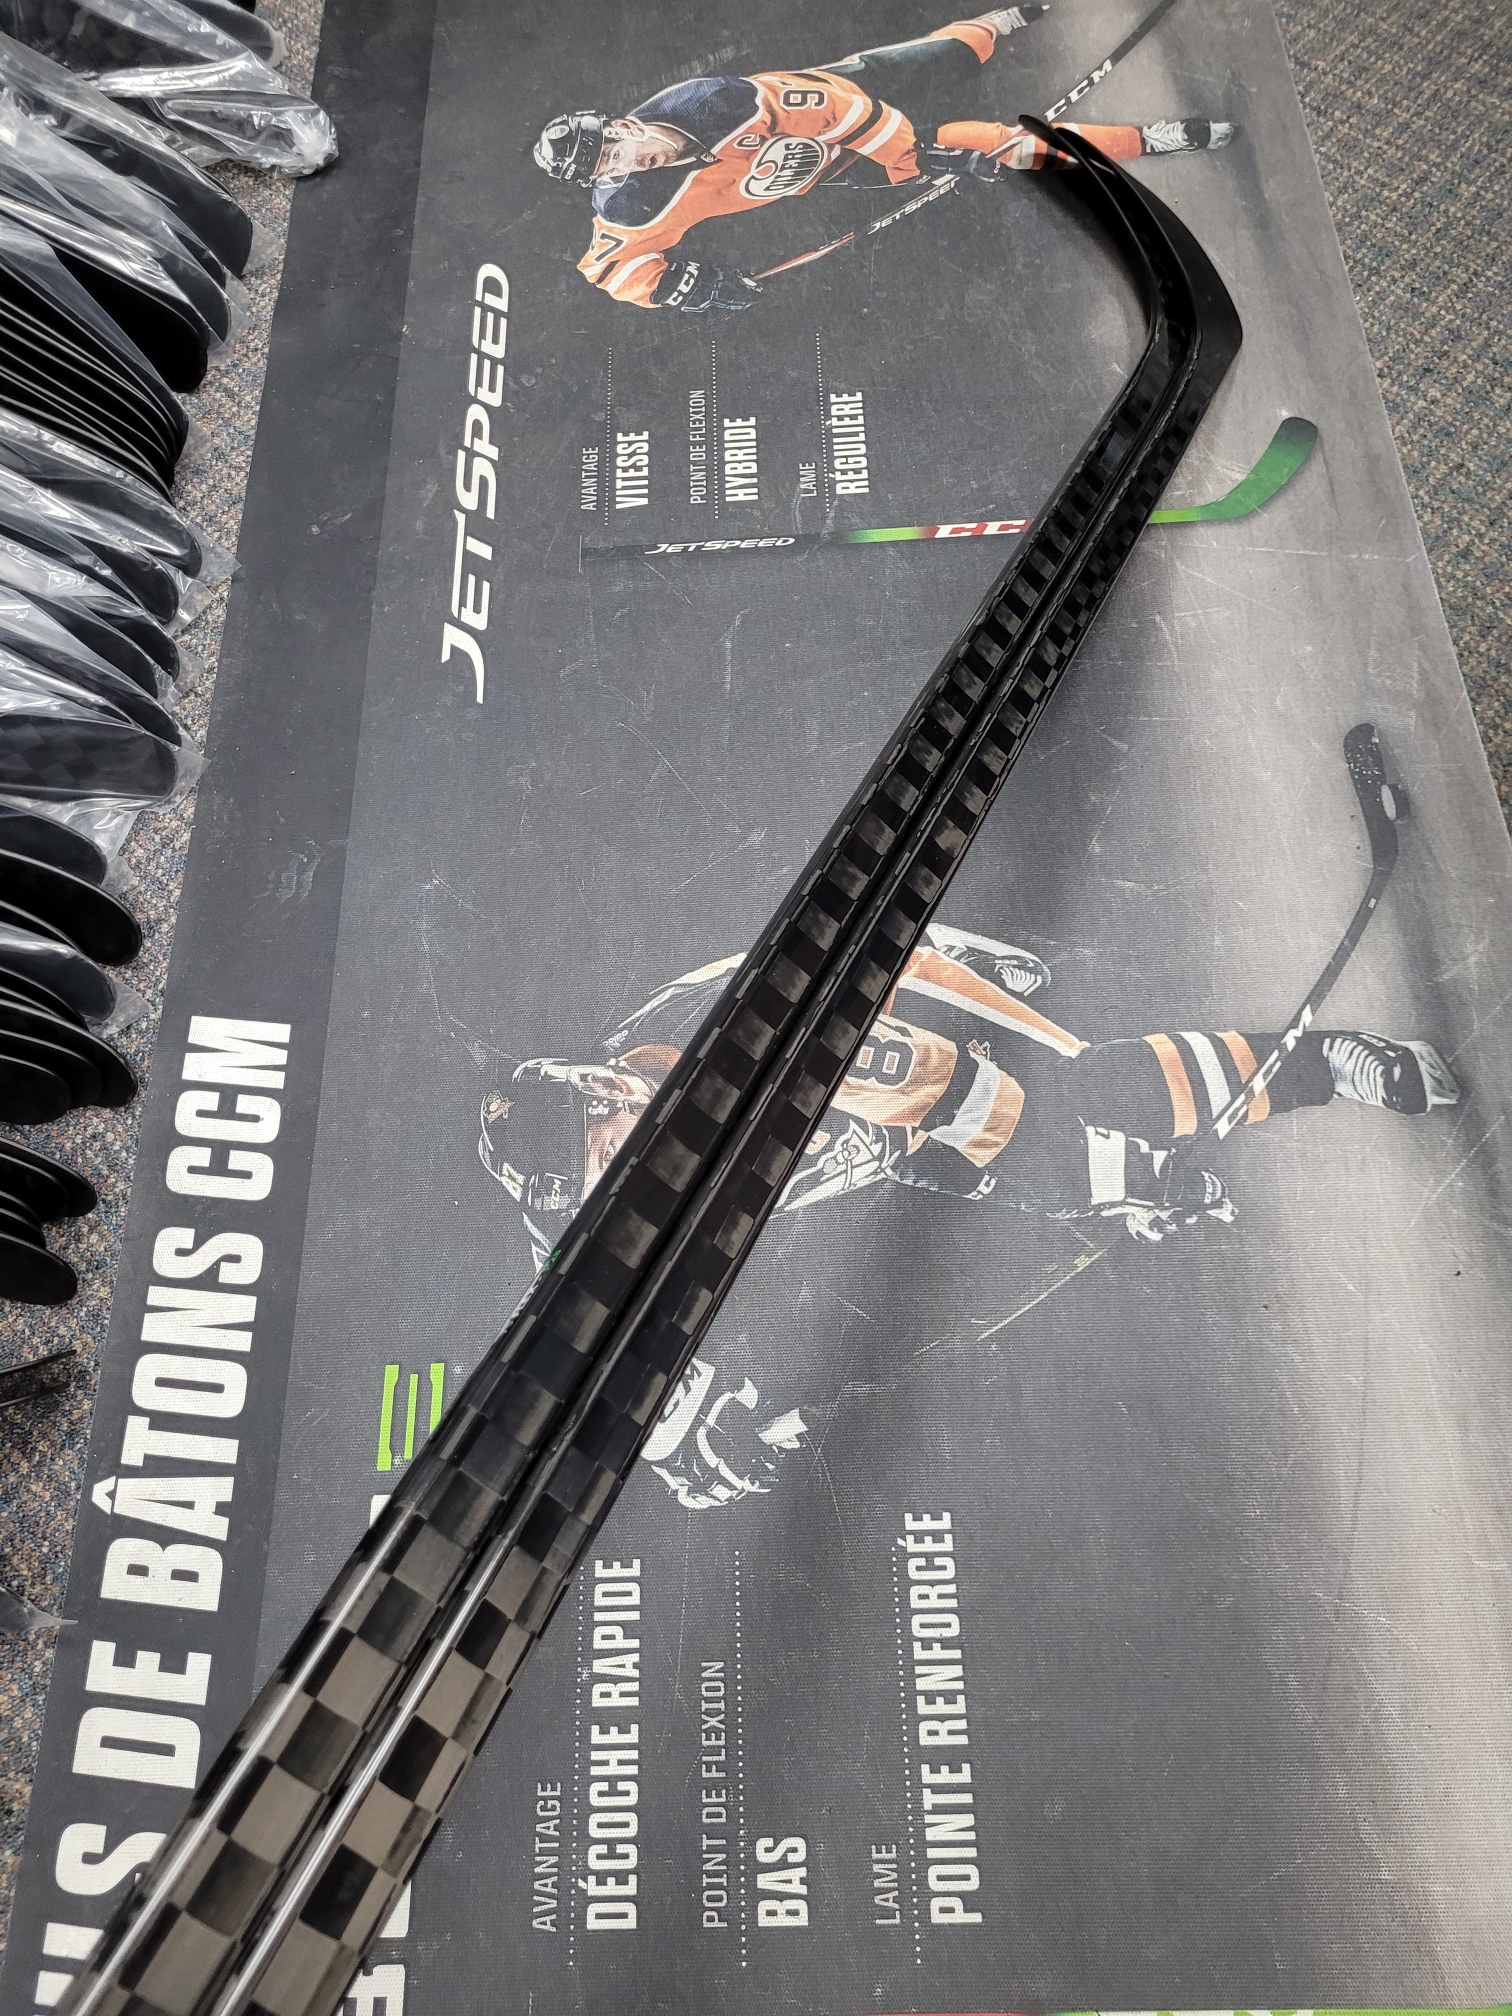 2 PACK | P28 | 75 Flex NEW! CARBON PRO Right Handed Hockey Stick P28 Pro Stock